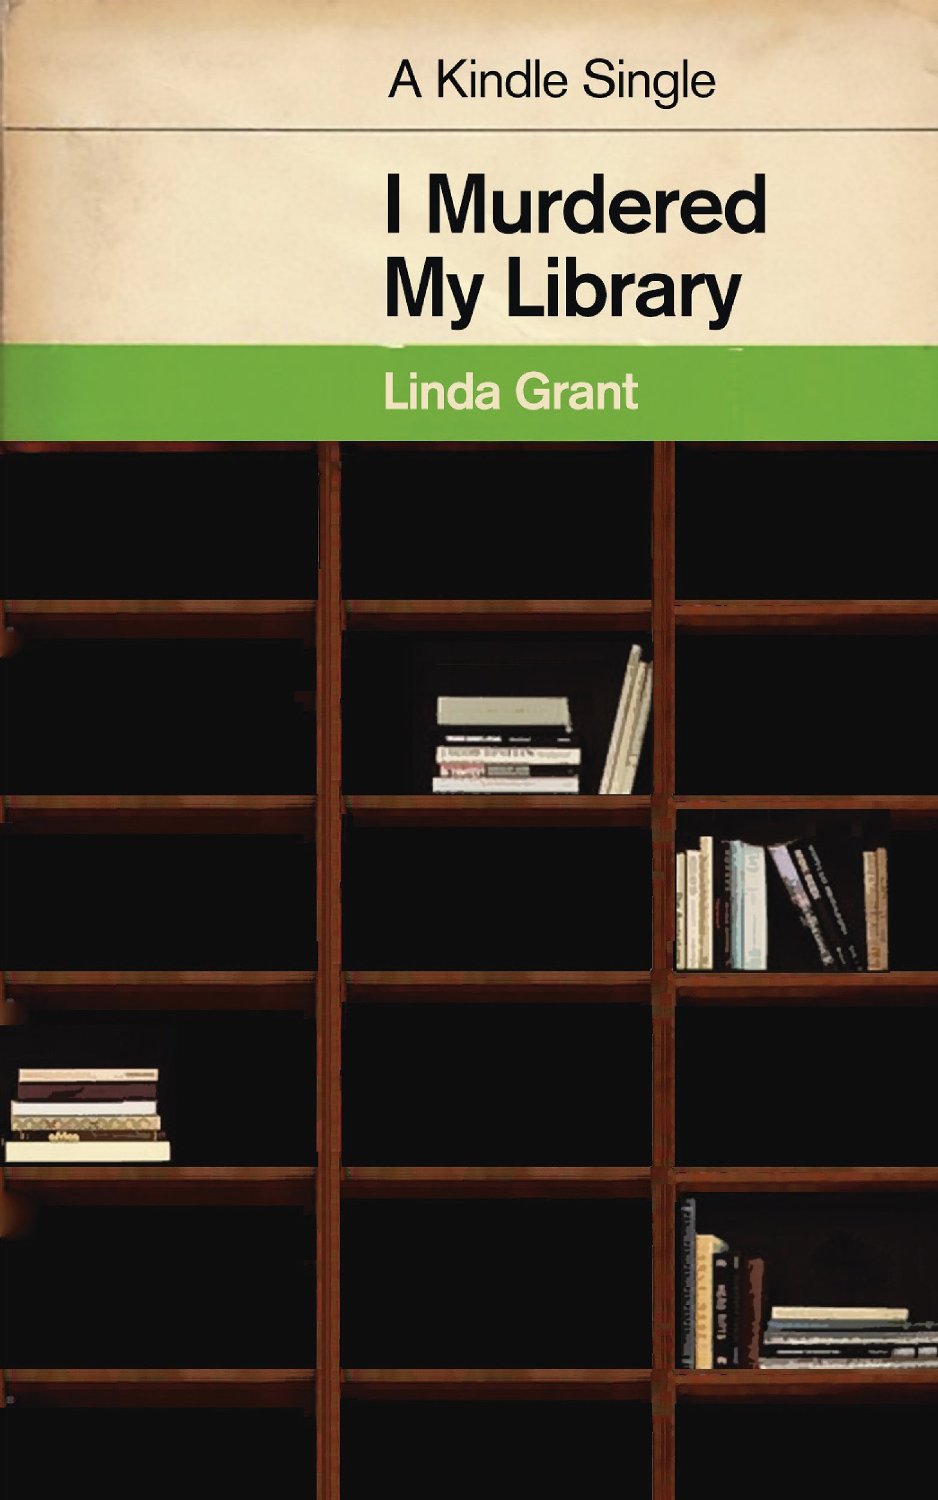 I Murdered My Library